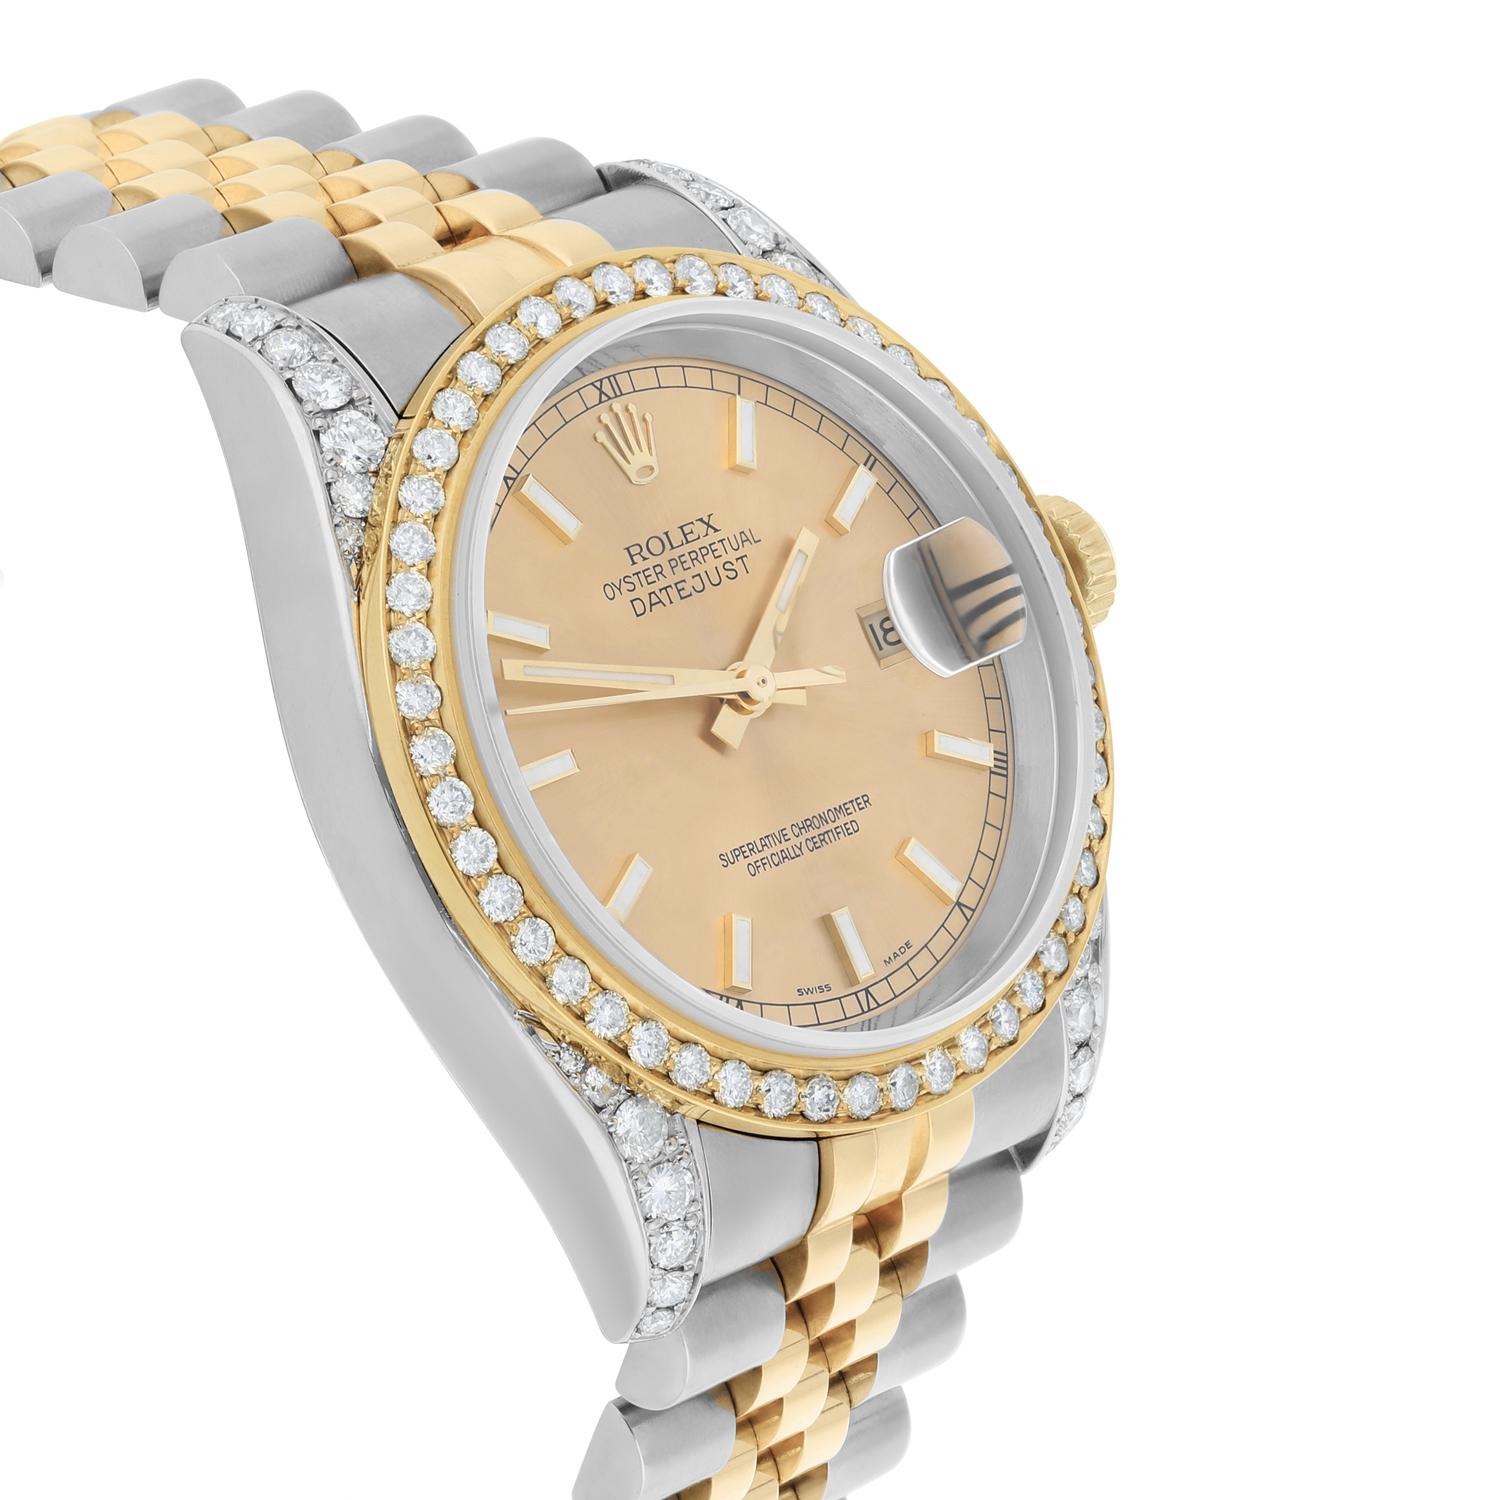 Rolex Datejust 36 Gold & Steel 116233 Champagne Index Dial Diamond Watch In Excellent Condition For Sale In New York, NY